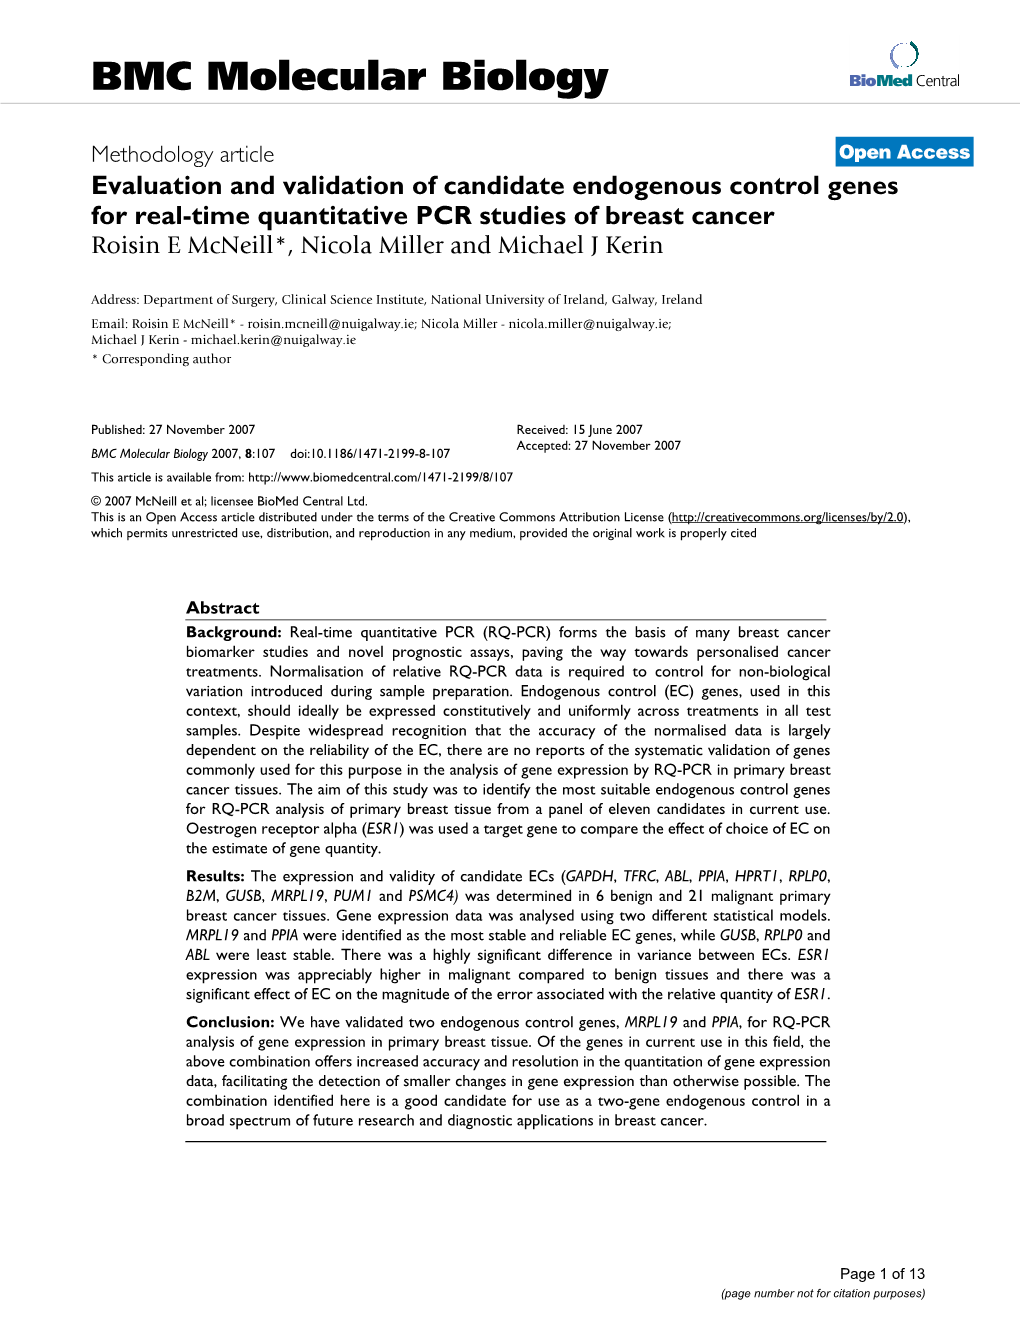 Evaluation and Validation of Candidate Endogenous